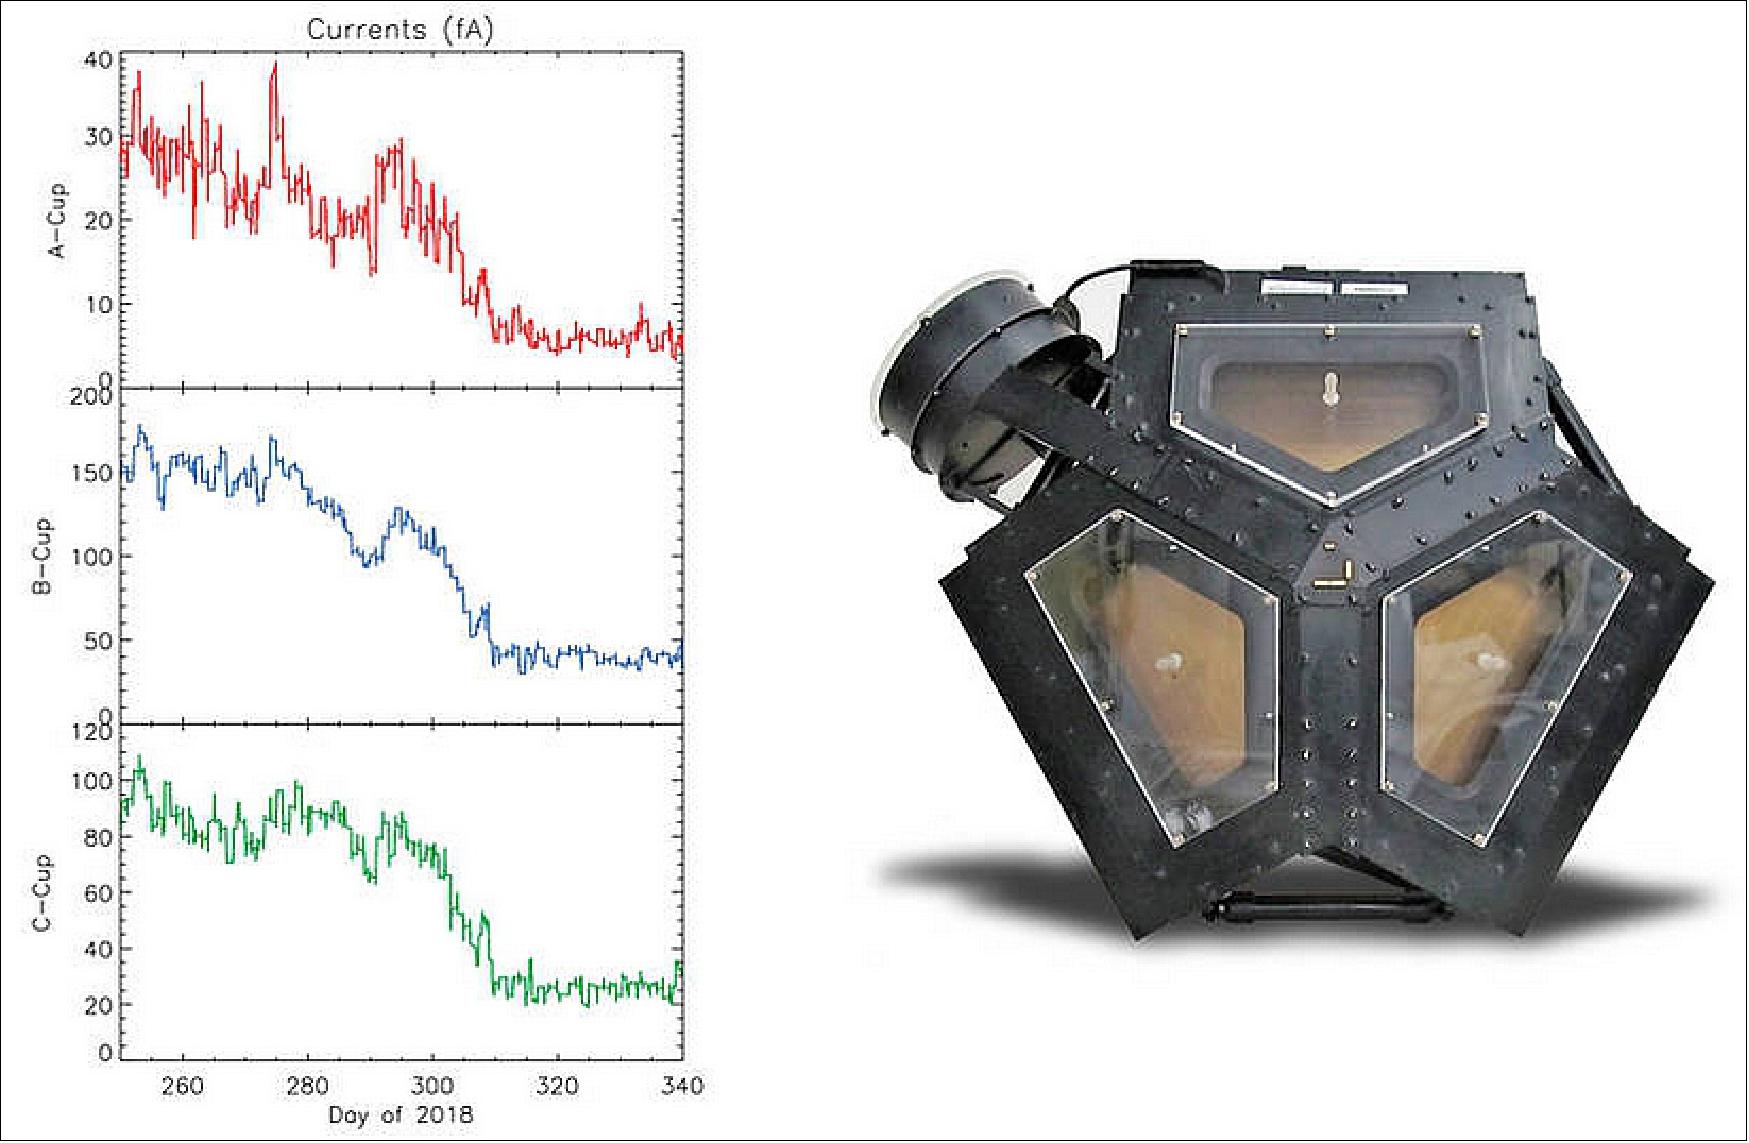 Figure 23: The set of graphs on the left illustrates the drop in electrical current detected in three directions by Voyager 2's plasma science experiment (PLS) to background levels. They are among the key pieces of data that Voyager scientists used to determine that Voyager 2 entered interstellar space, the space between stars, in November 2018. The disappearance in electrical current in the sunward-looking detectors indicates the spacecraft is no longer in the outward flow of solar wind plasma. It is instead in a new plasma environment — interstellar medium plasma. The image on the right shows the Faraday cups of the PLS. The three sunward pointed cups point in slightly different directions in order to measure the direction of the solar wind. The fourth cup (on the upper left) points perpendicular to the others (image credit: NASA/JPL-Caltech)